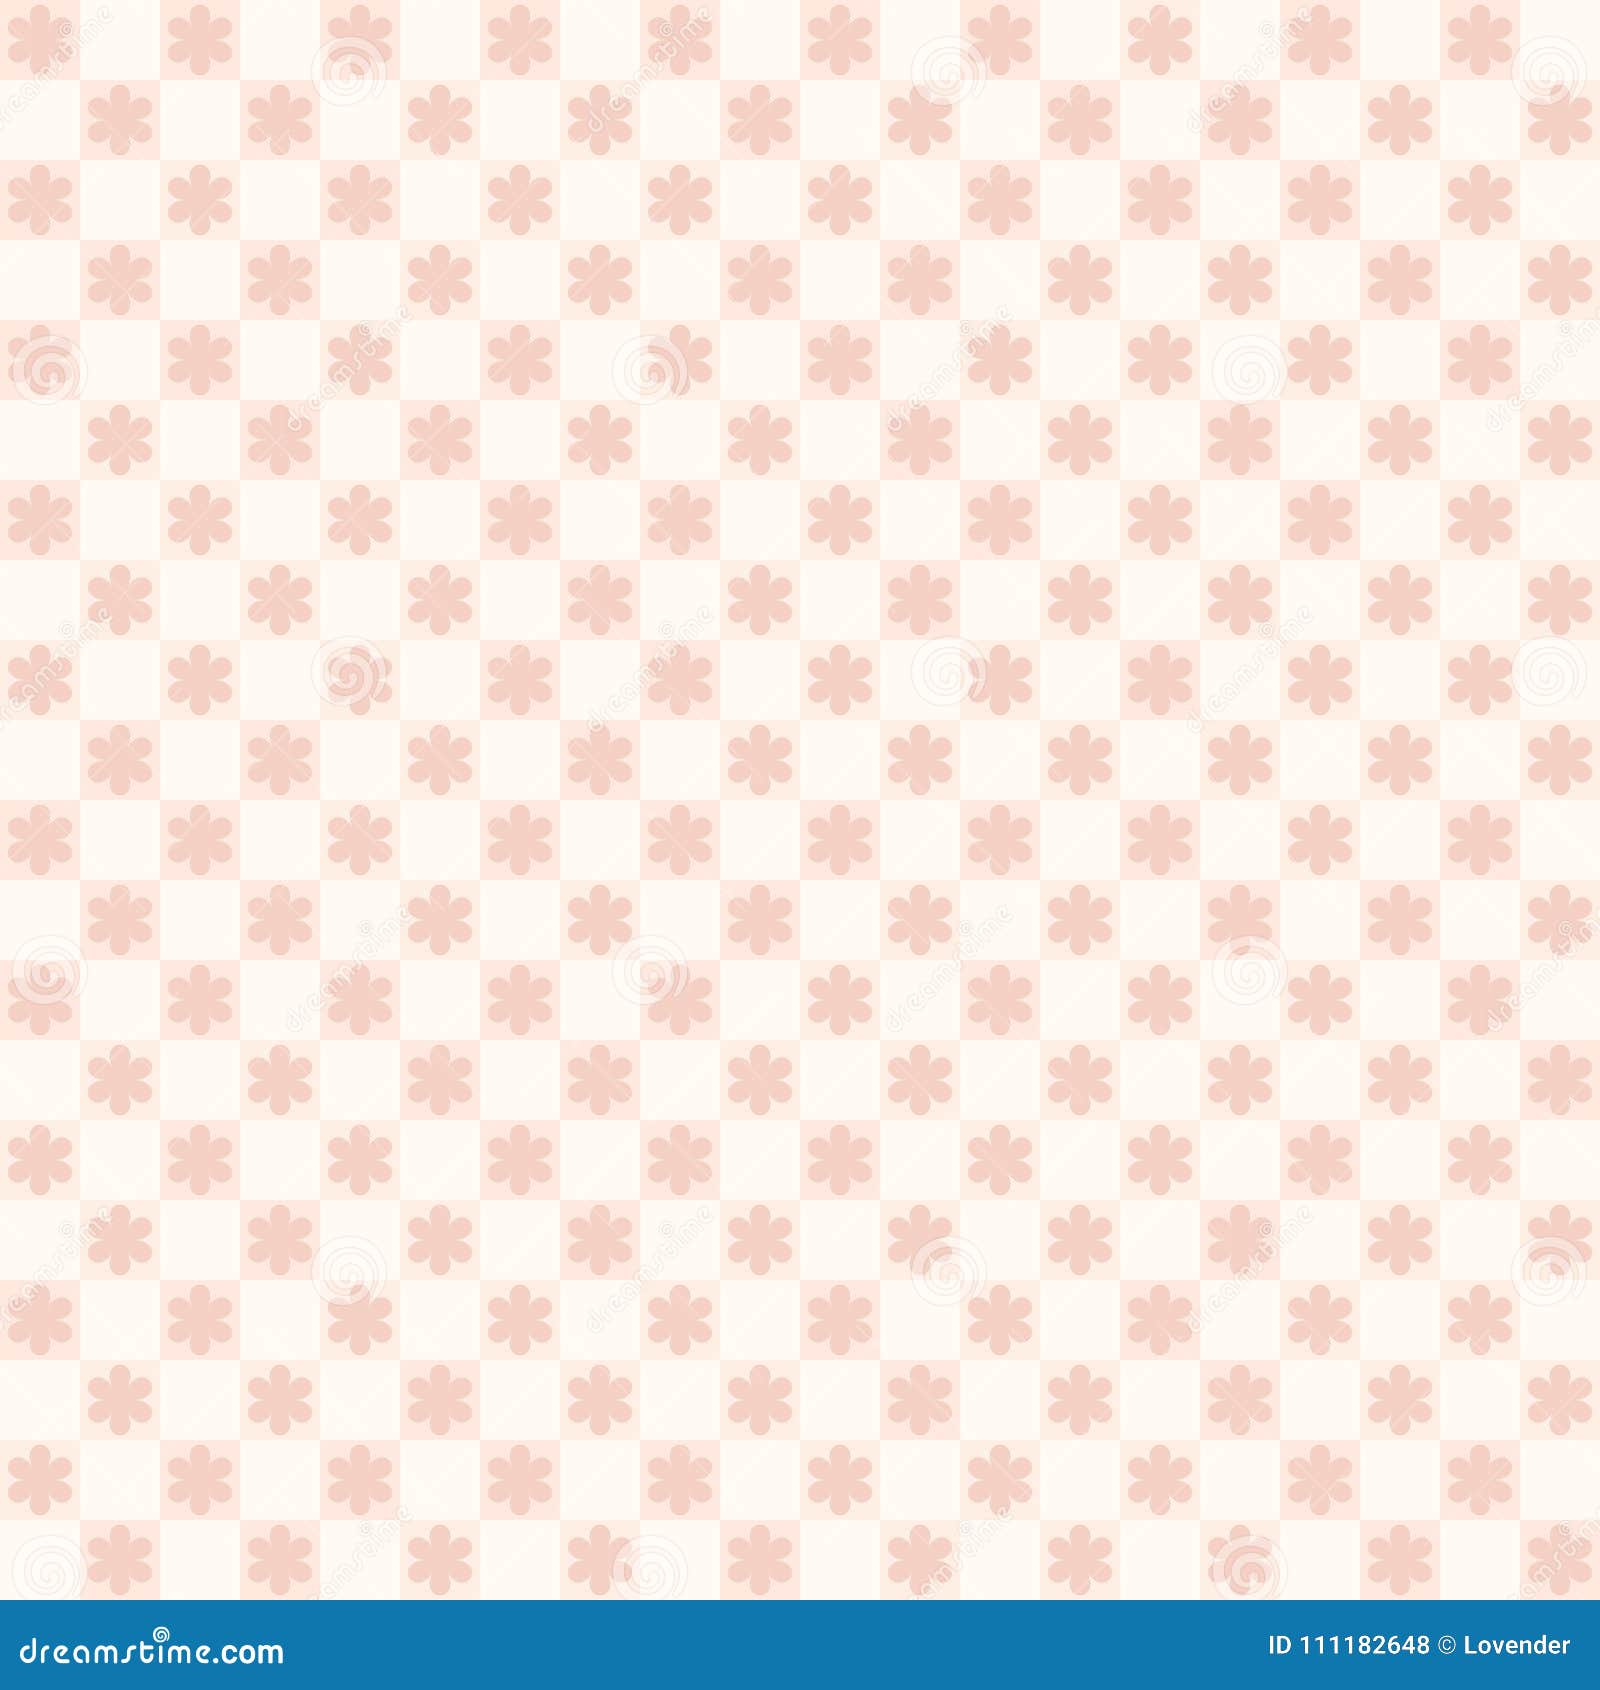 Checkered Pattern With Flowers. Seamless Vector Background Stock Vector ...